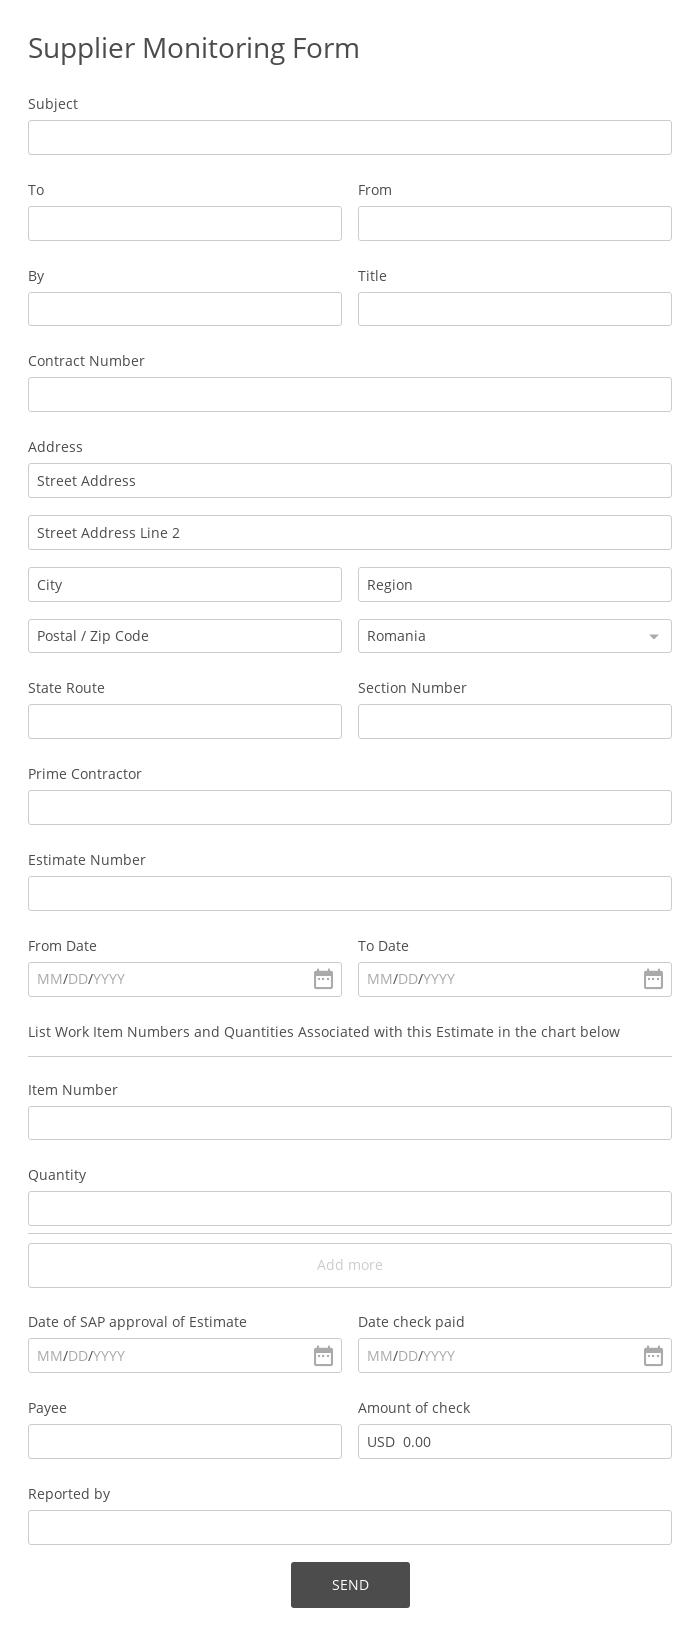 Supplier Monitoring Form